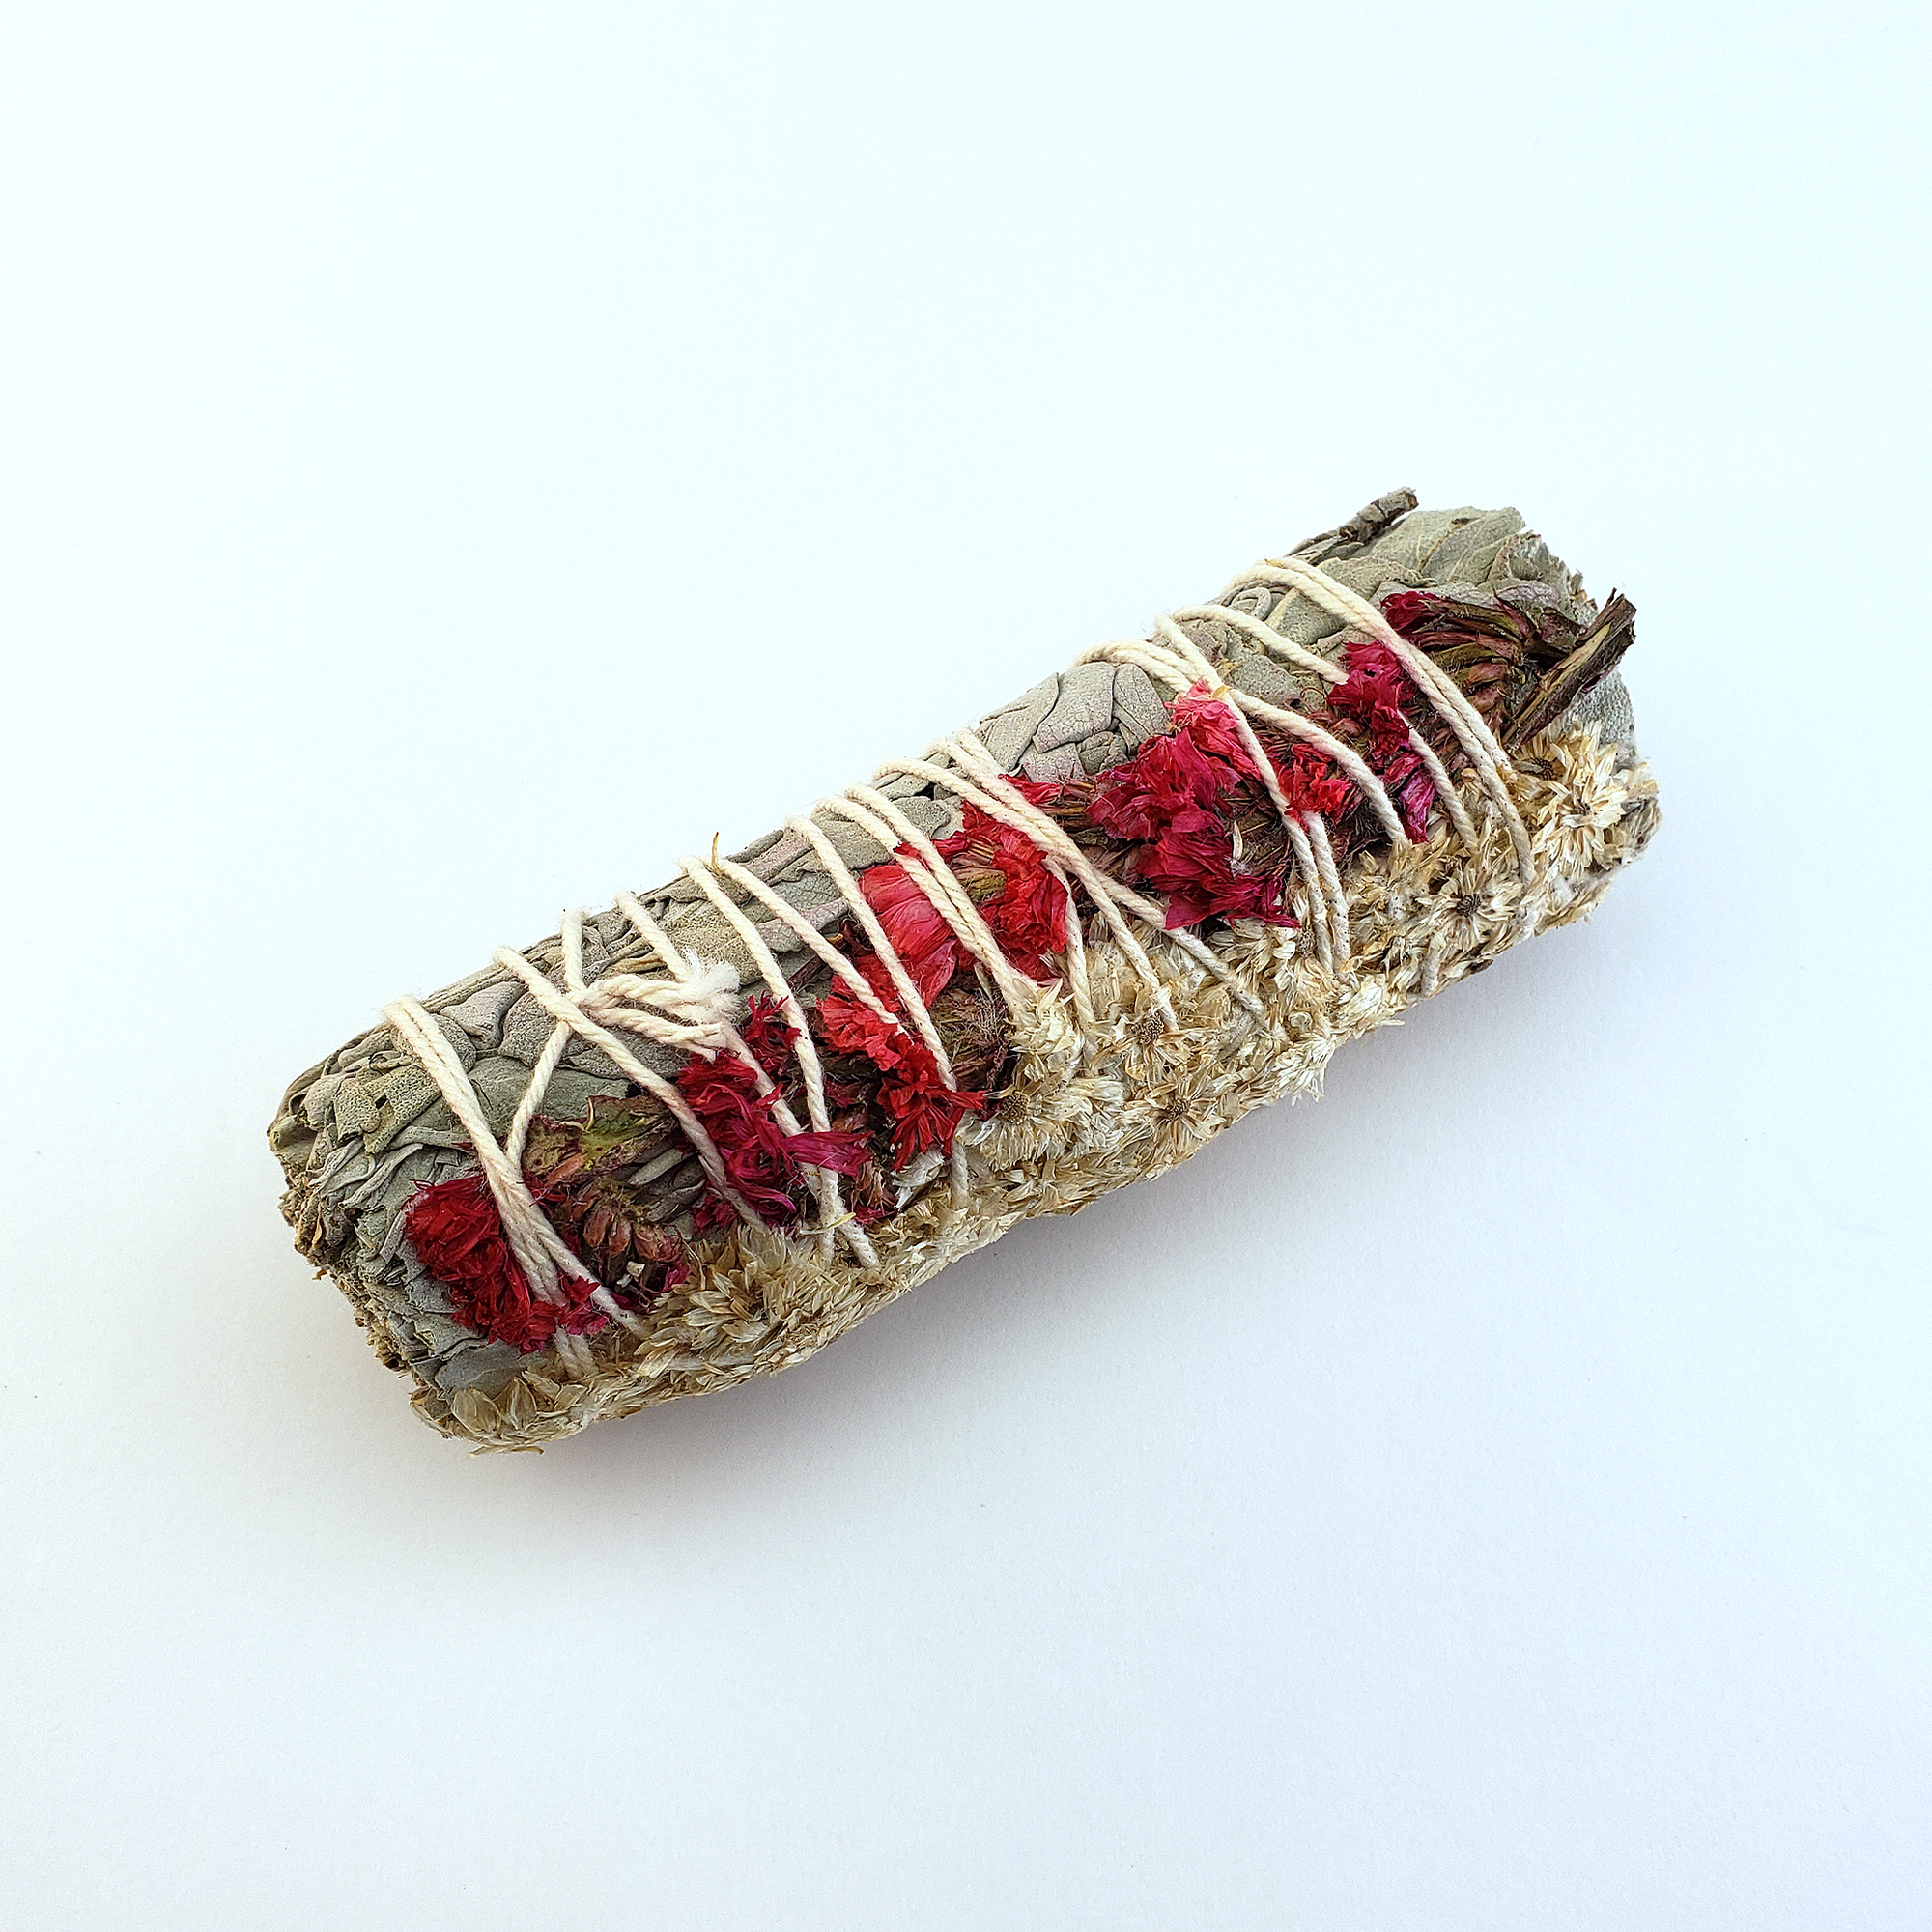 Mullein &amp; Red Statice White Sage Bundle - One 4 Inch Smudge Stick